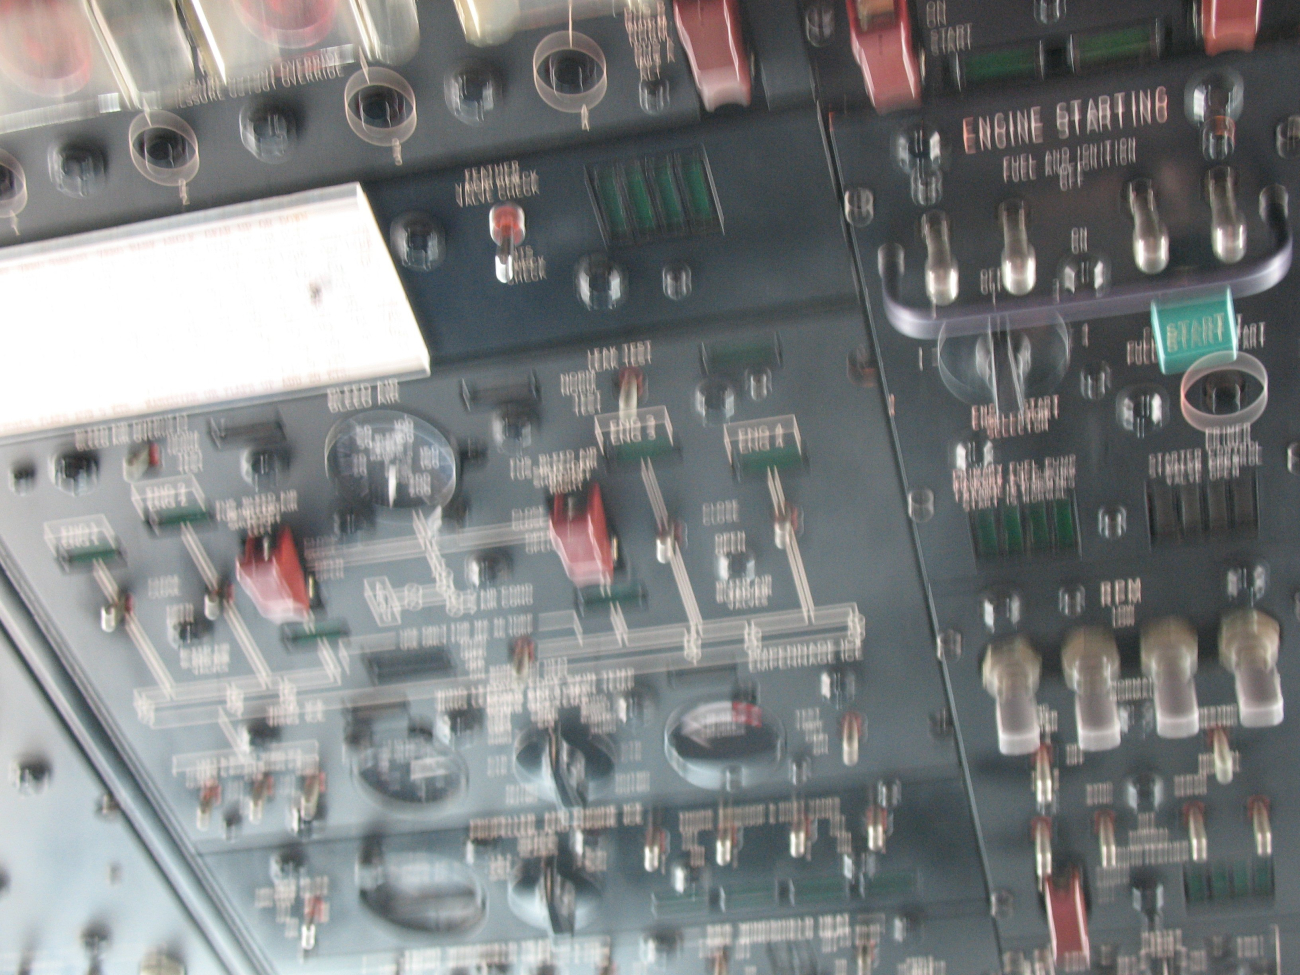 View of control panel during turbulence